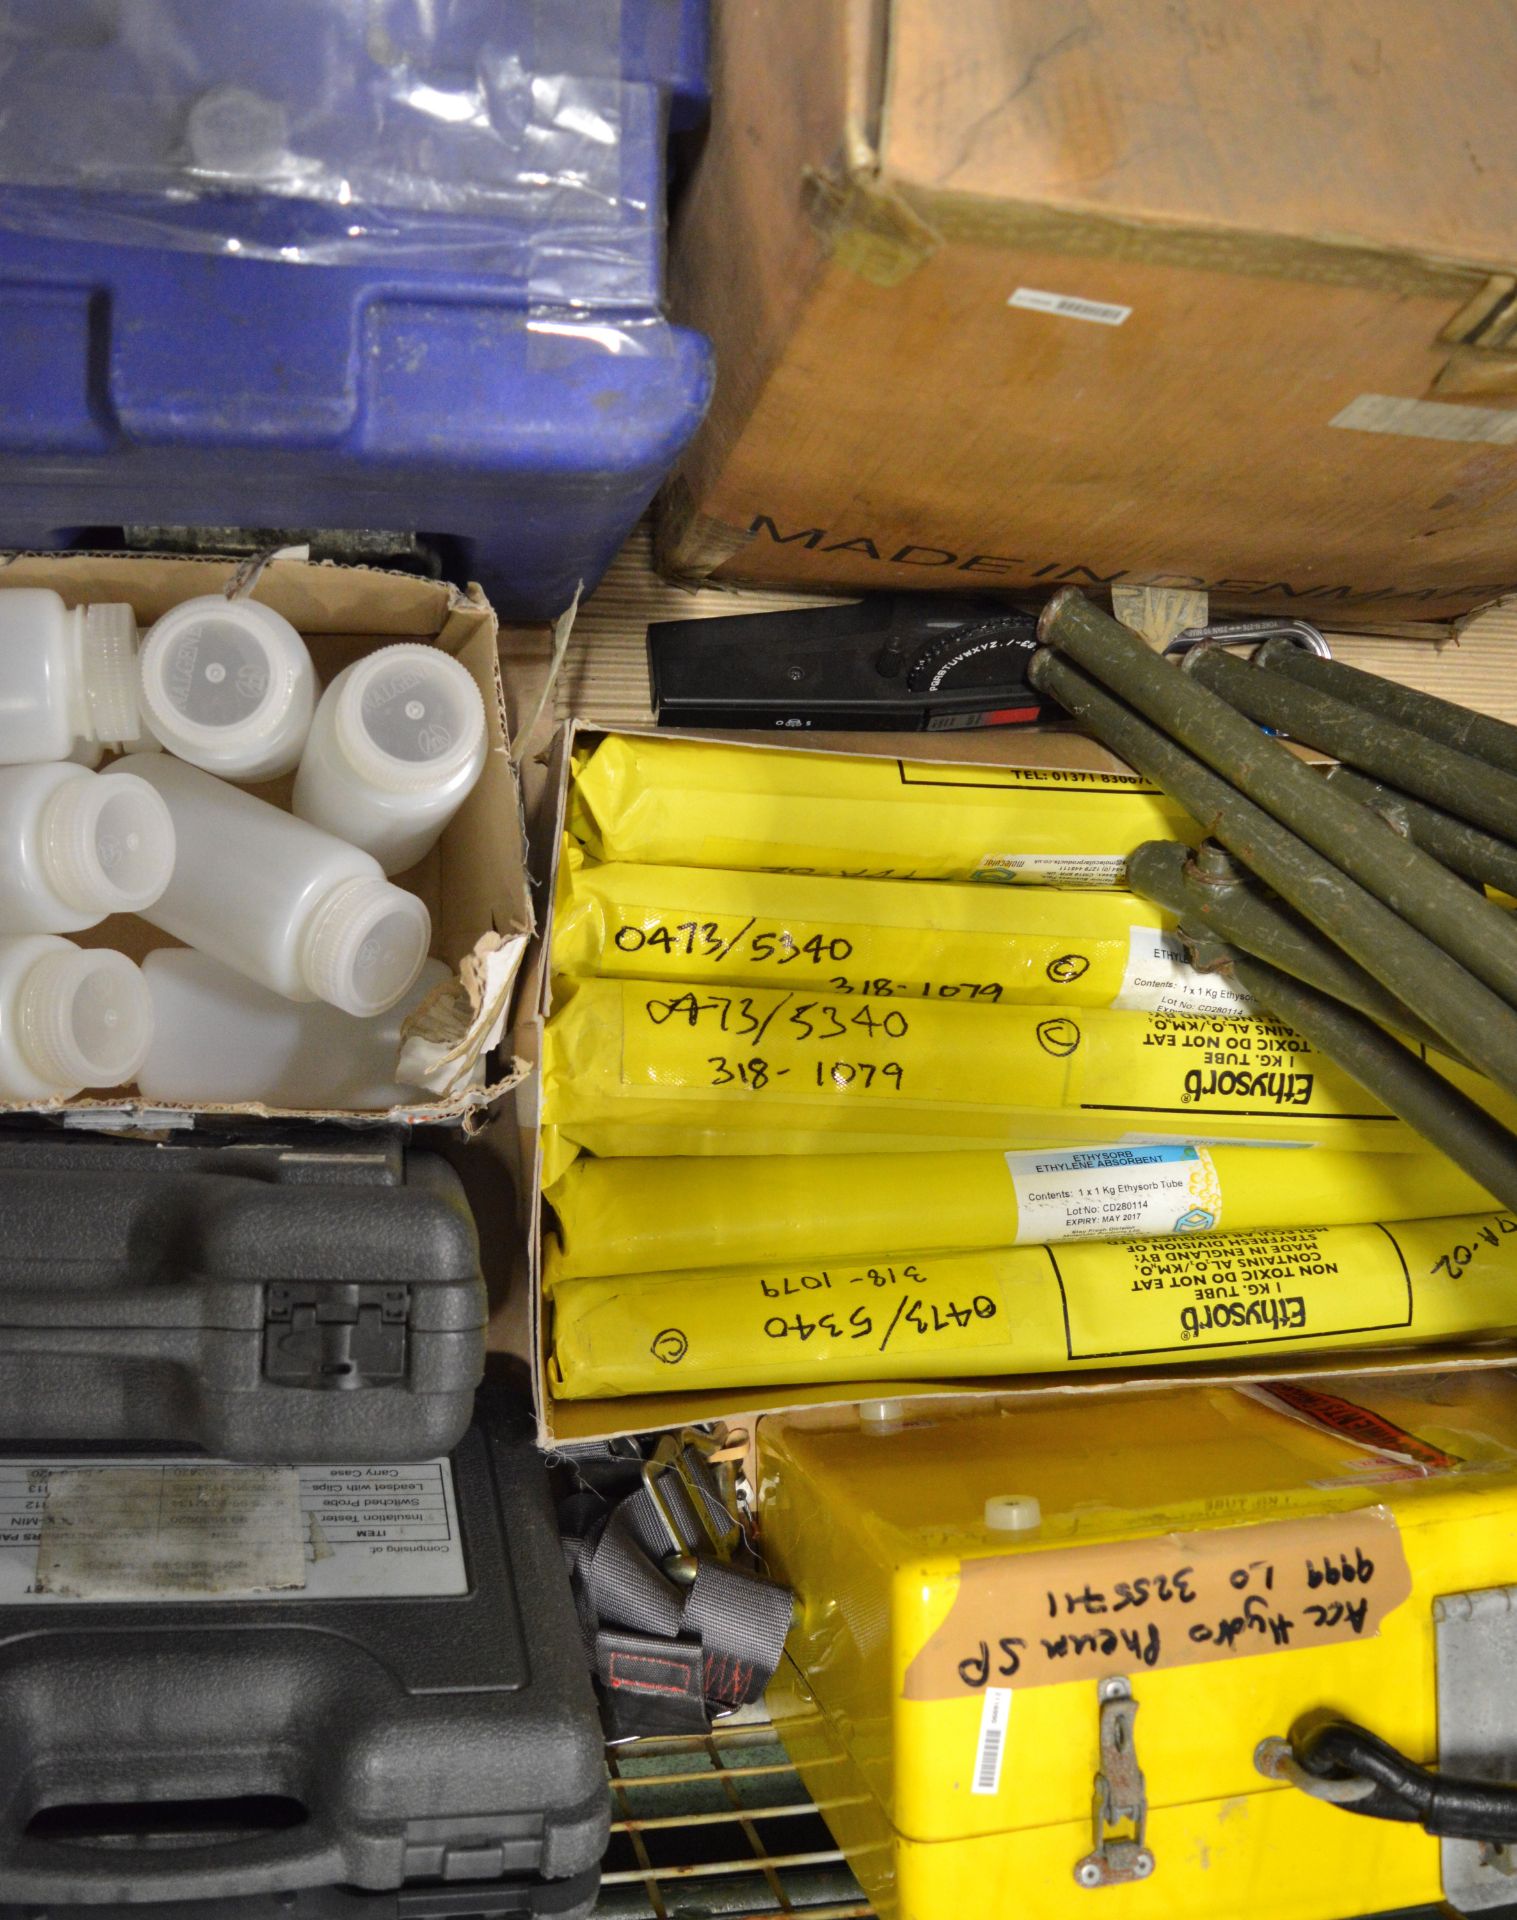 Tool Case, Ethysord Tube, Filter, Tape. Approx 100x Polypropylene Ball. Sample Bottles. Wo - Image 2 of 2